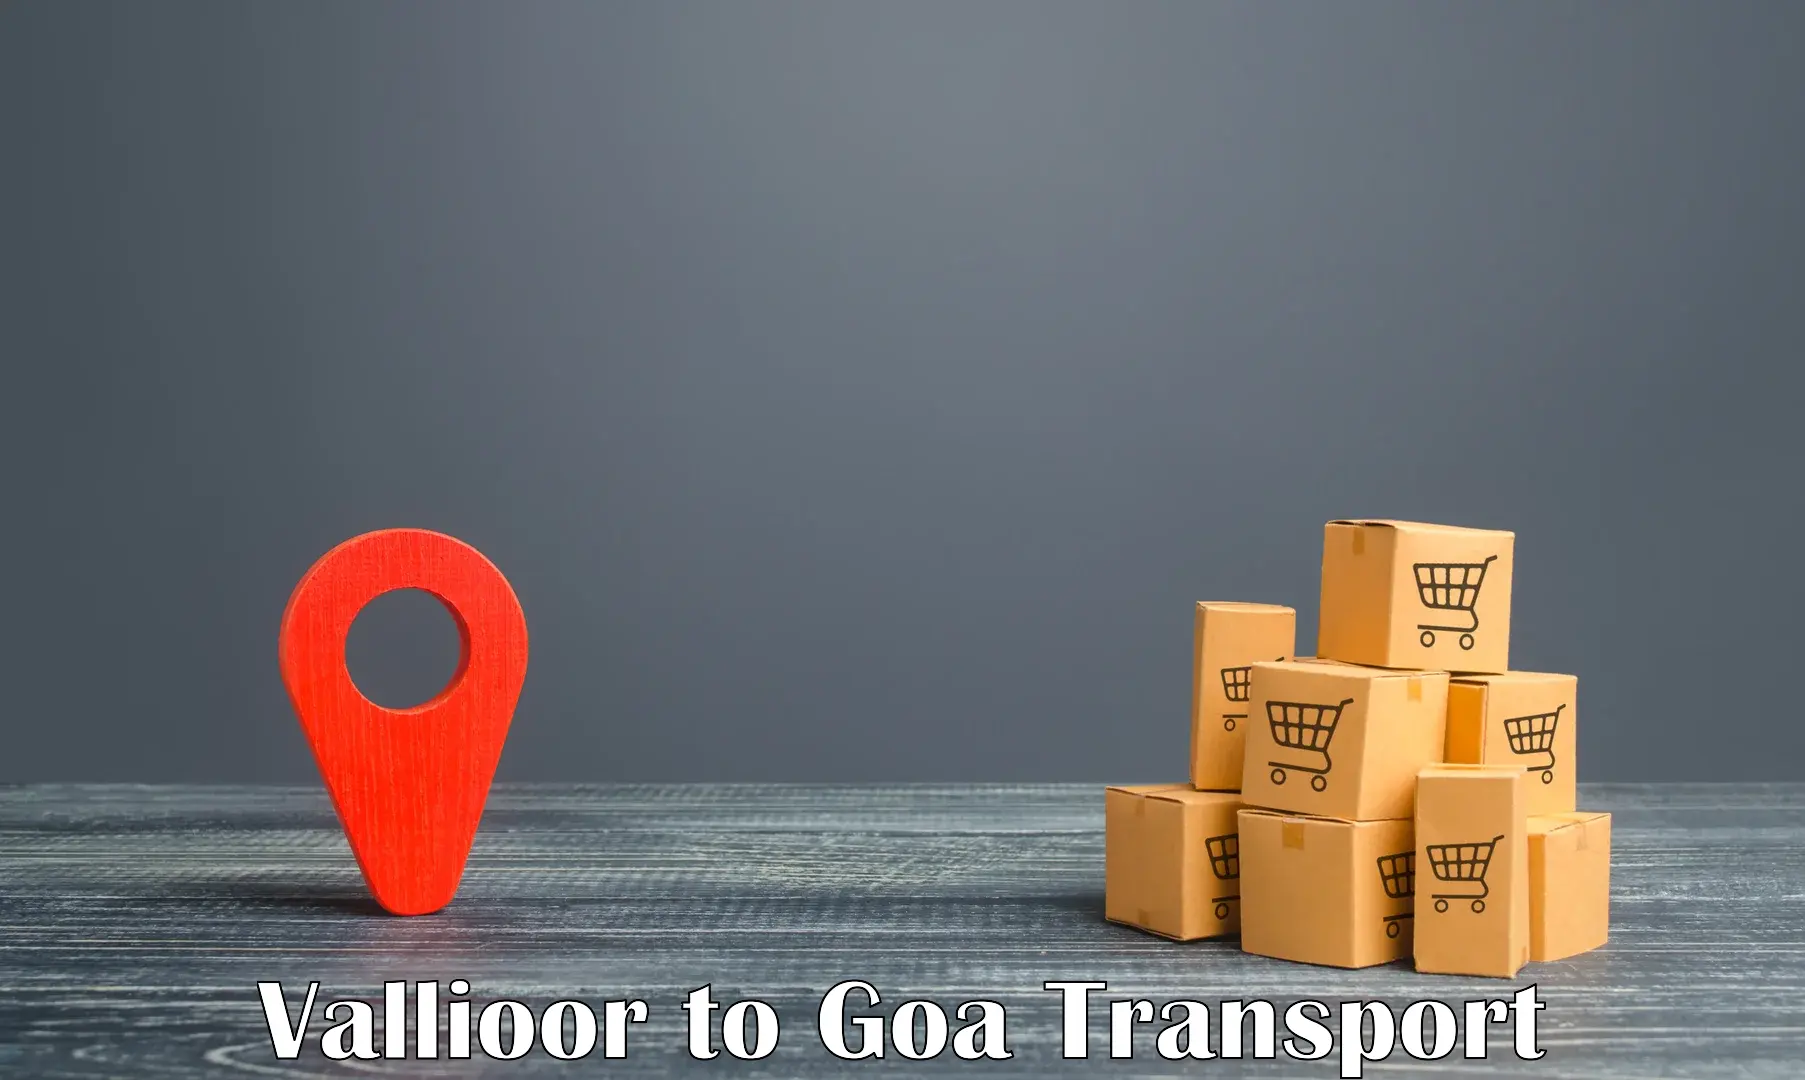 Transport bike from one state to another Vallioor to Goa